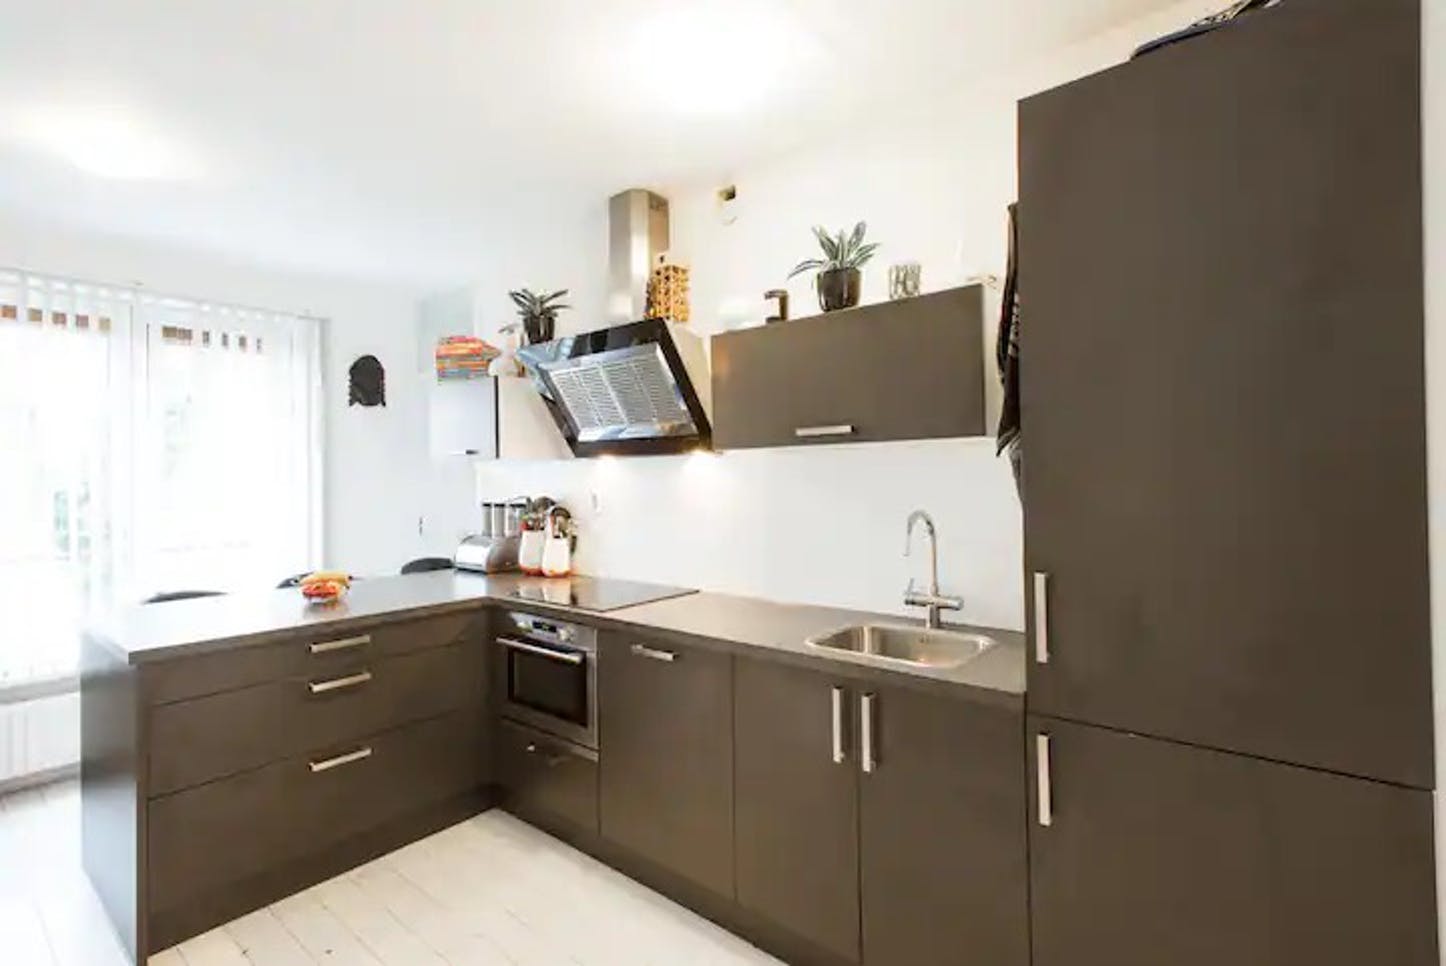 Baviastraat - Furnished property for expats in Amsterdam